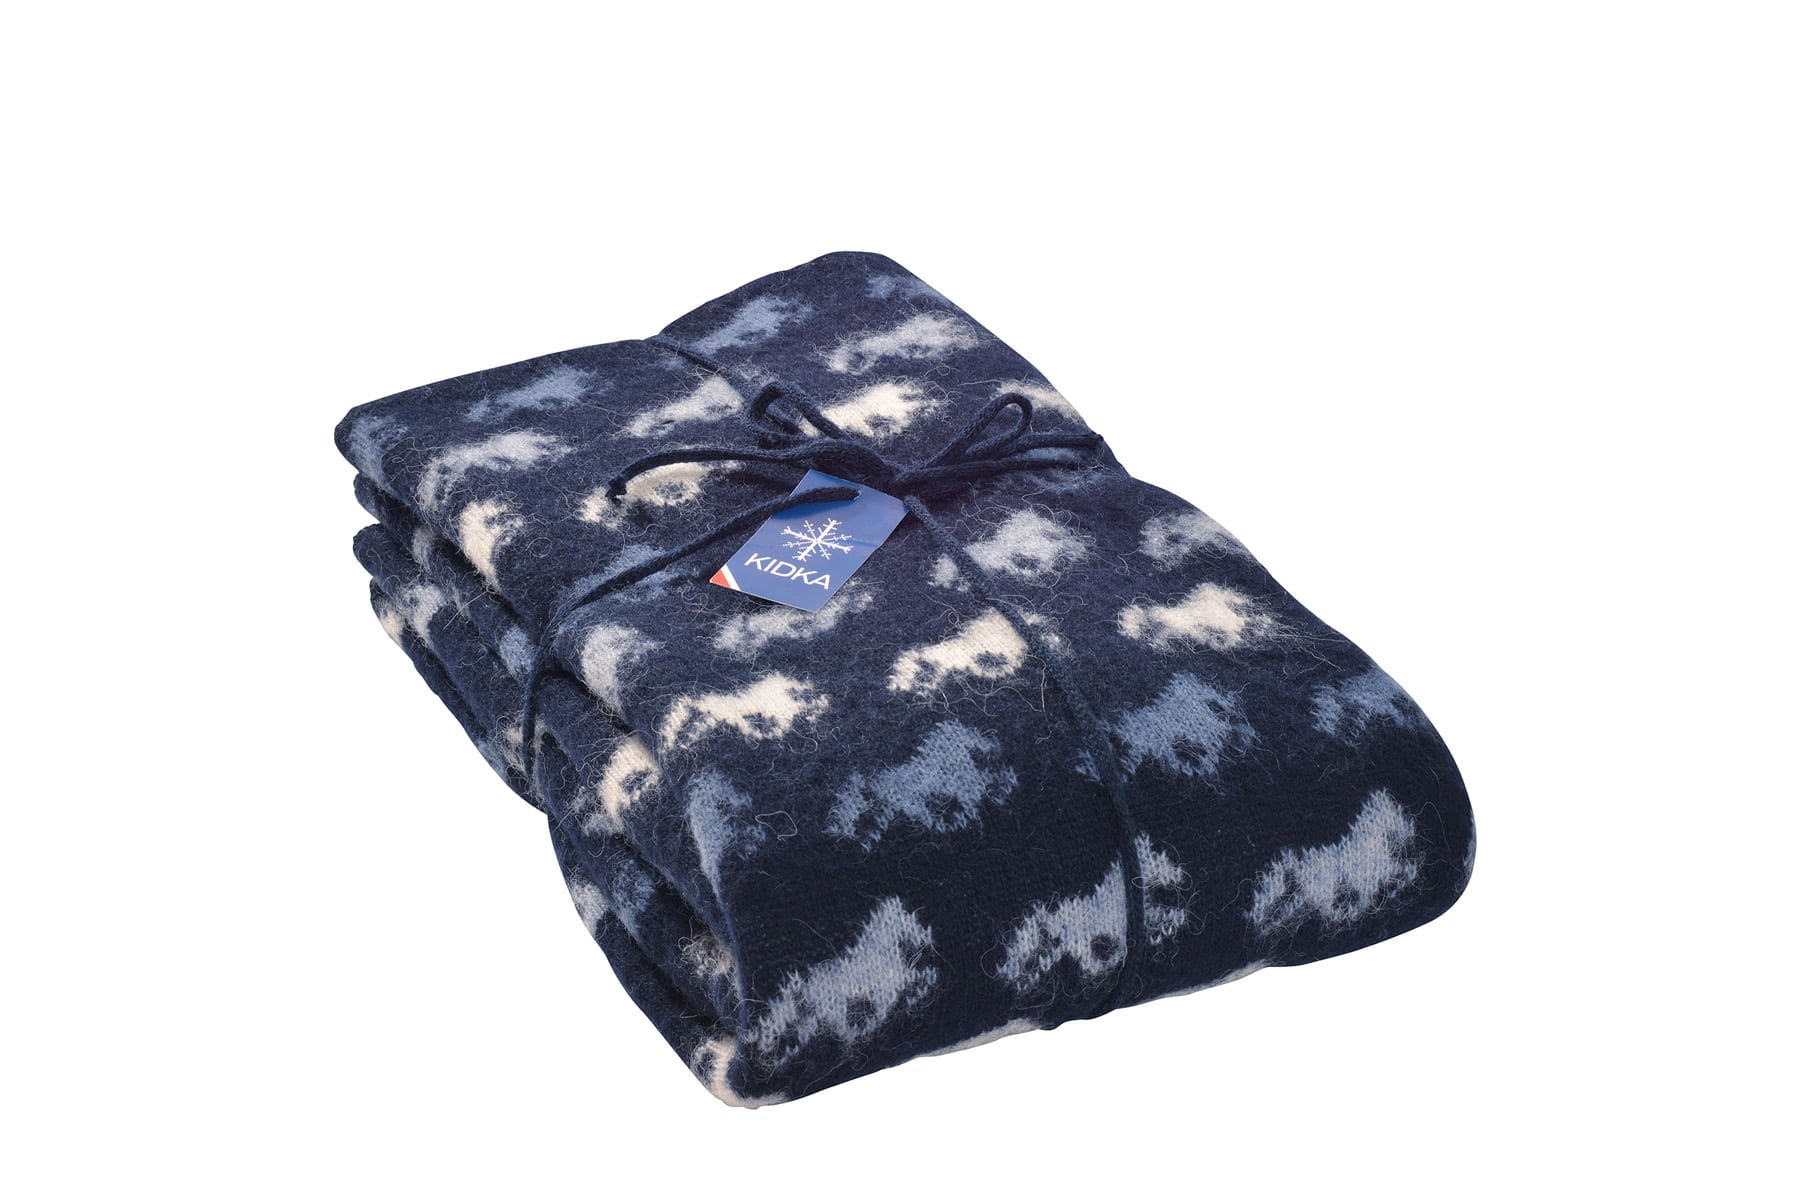 Kidka woolen blanket. Gift for those who love Icelandic wool products.